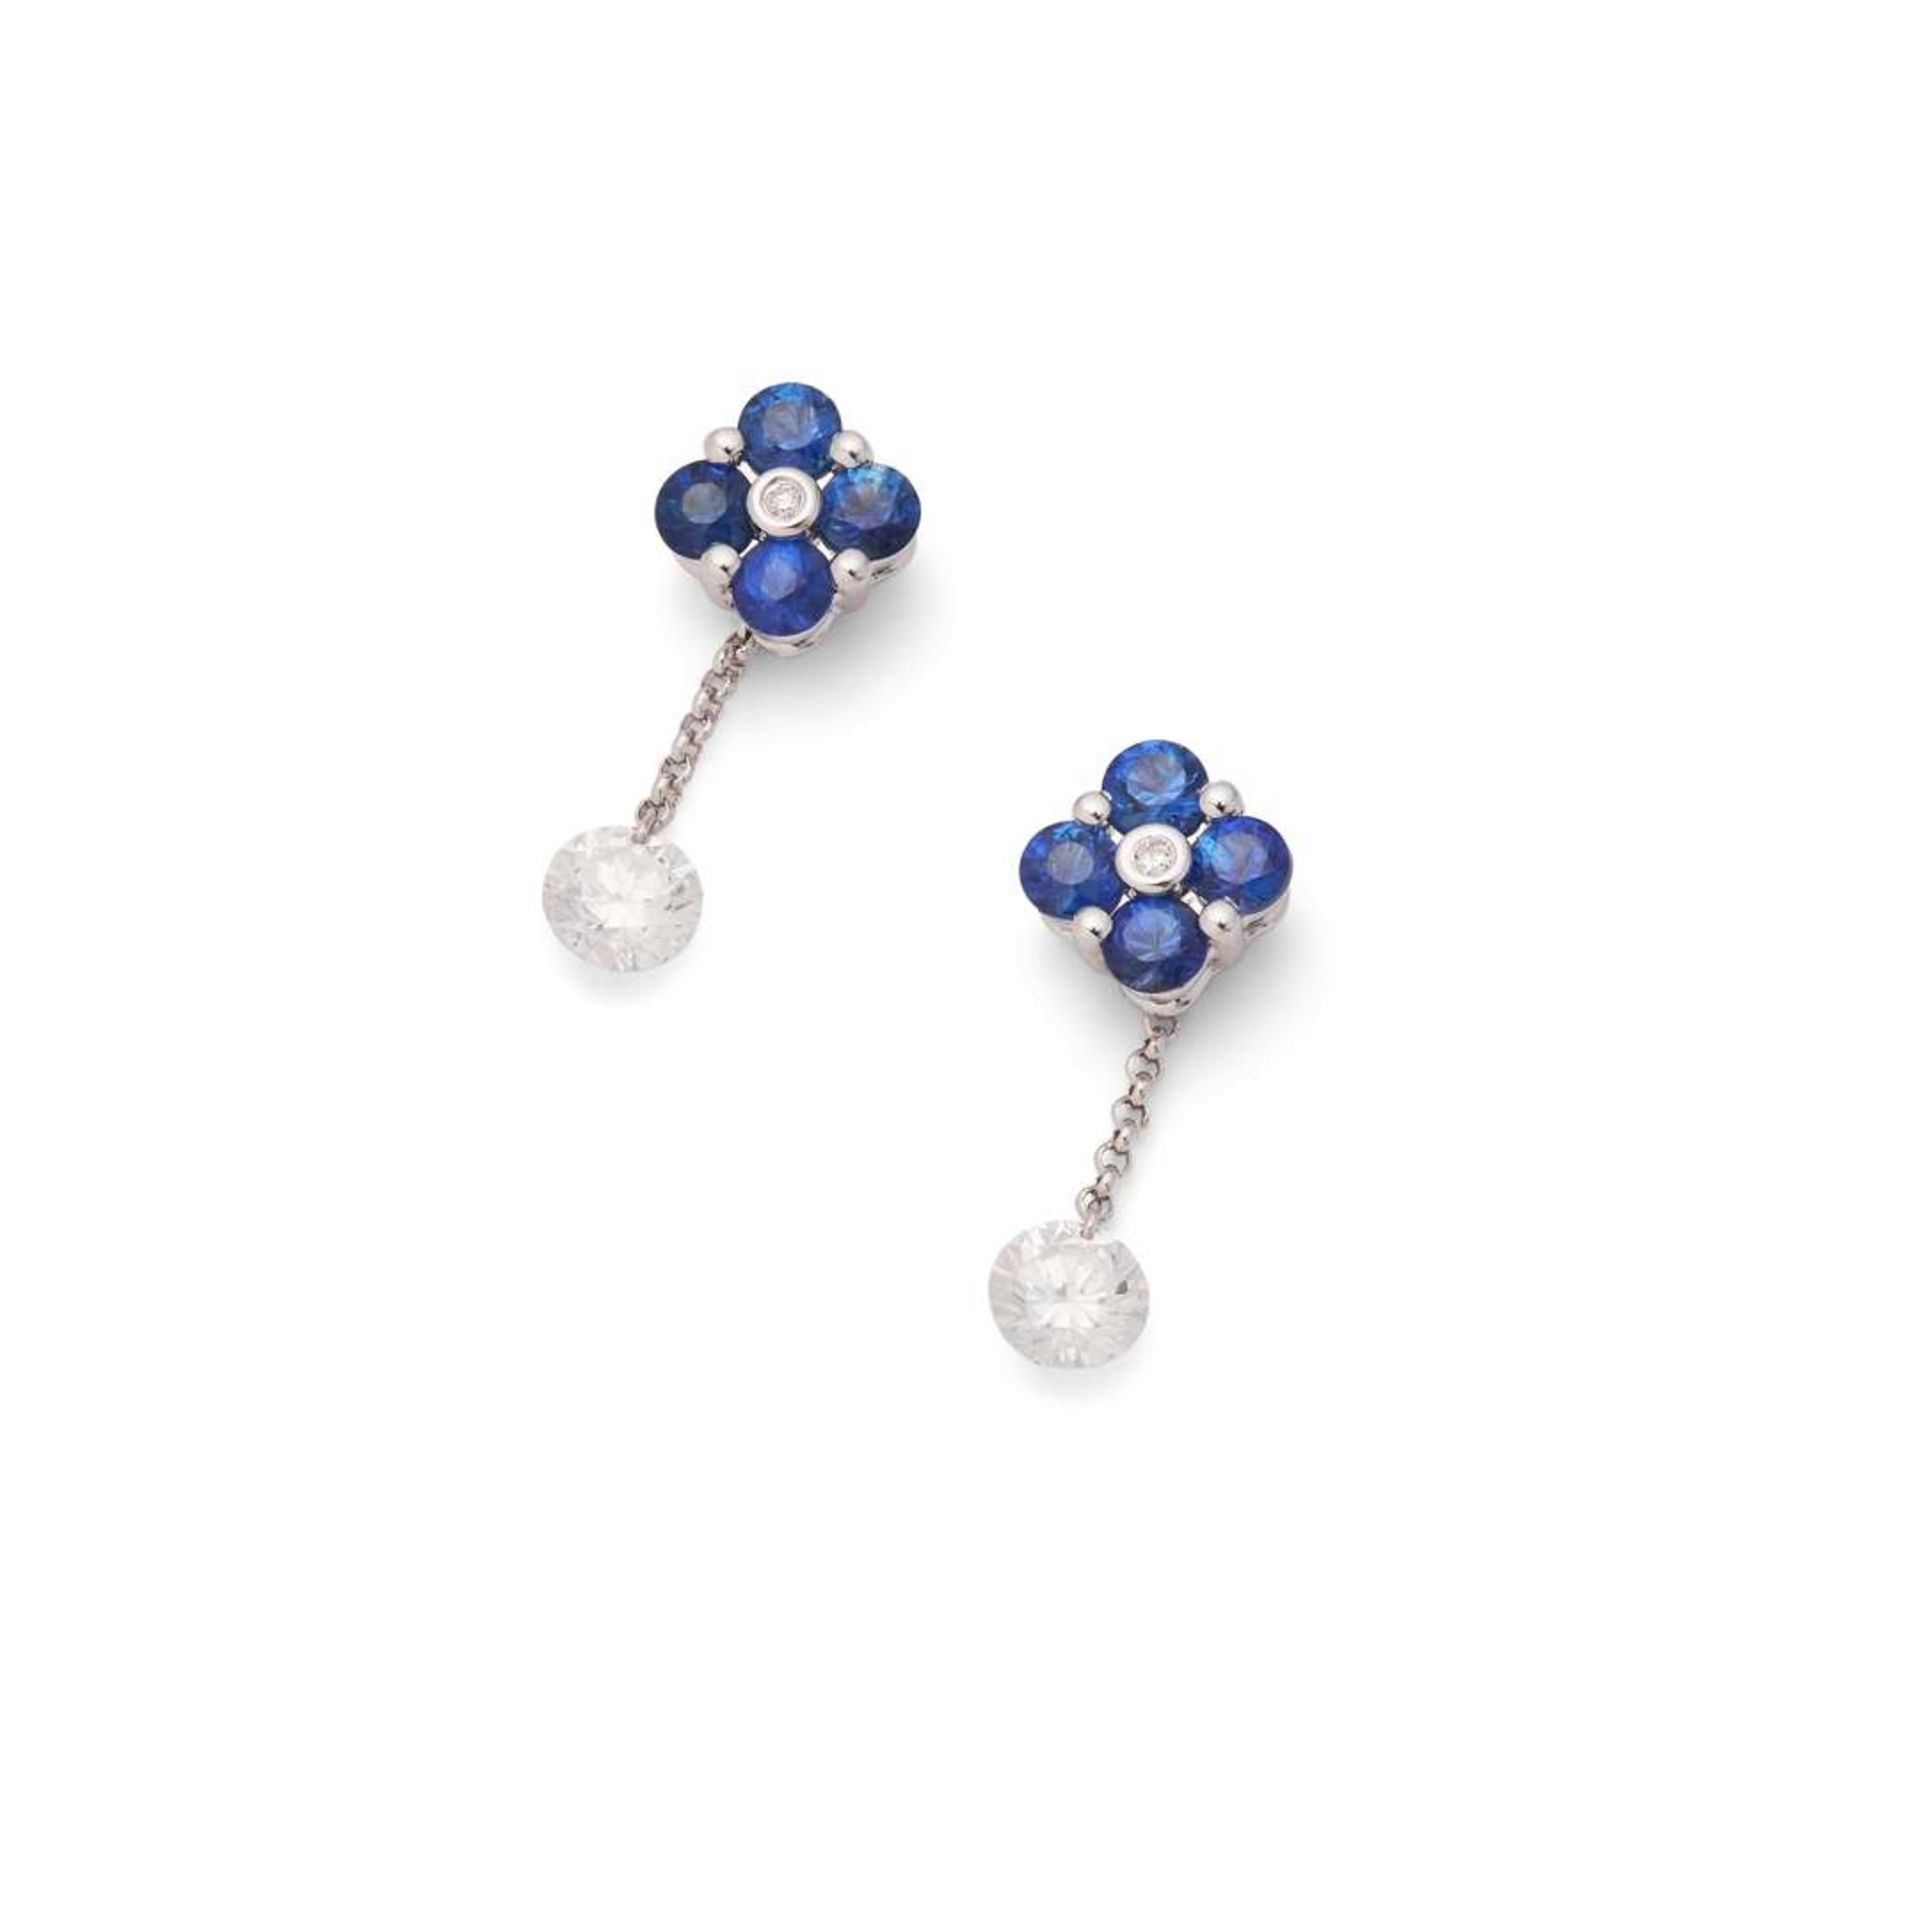 A pair of blue sapphire and diamond earrings